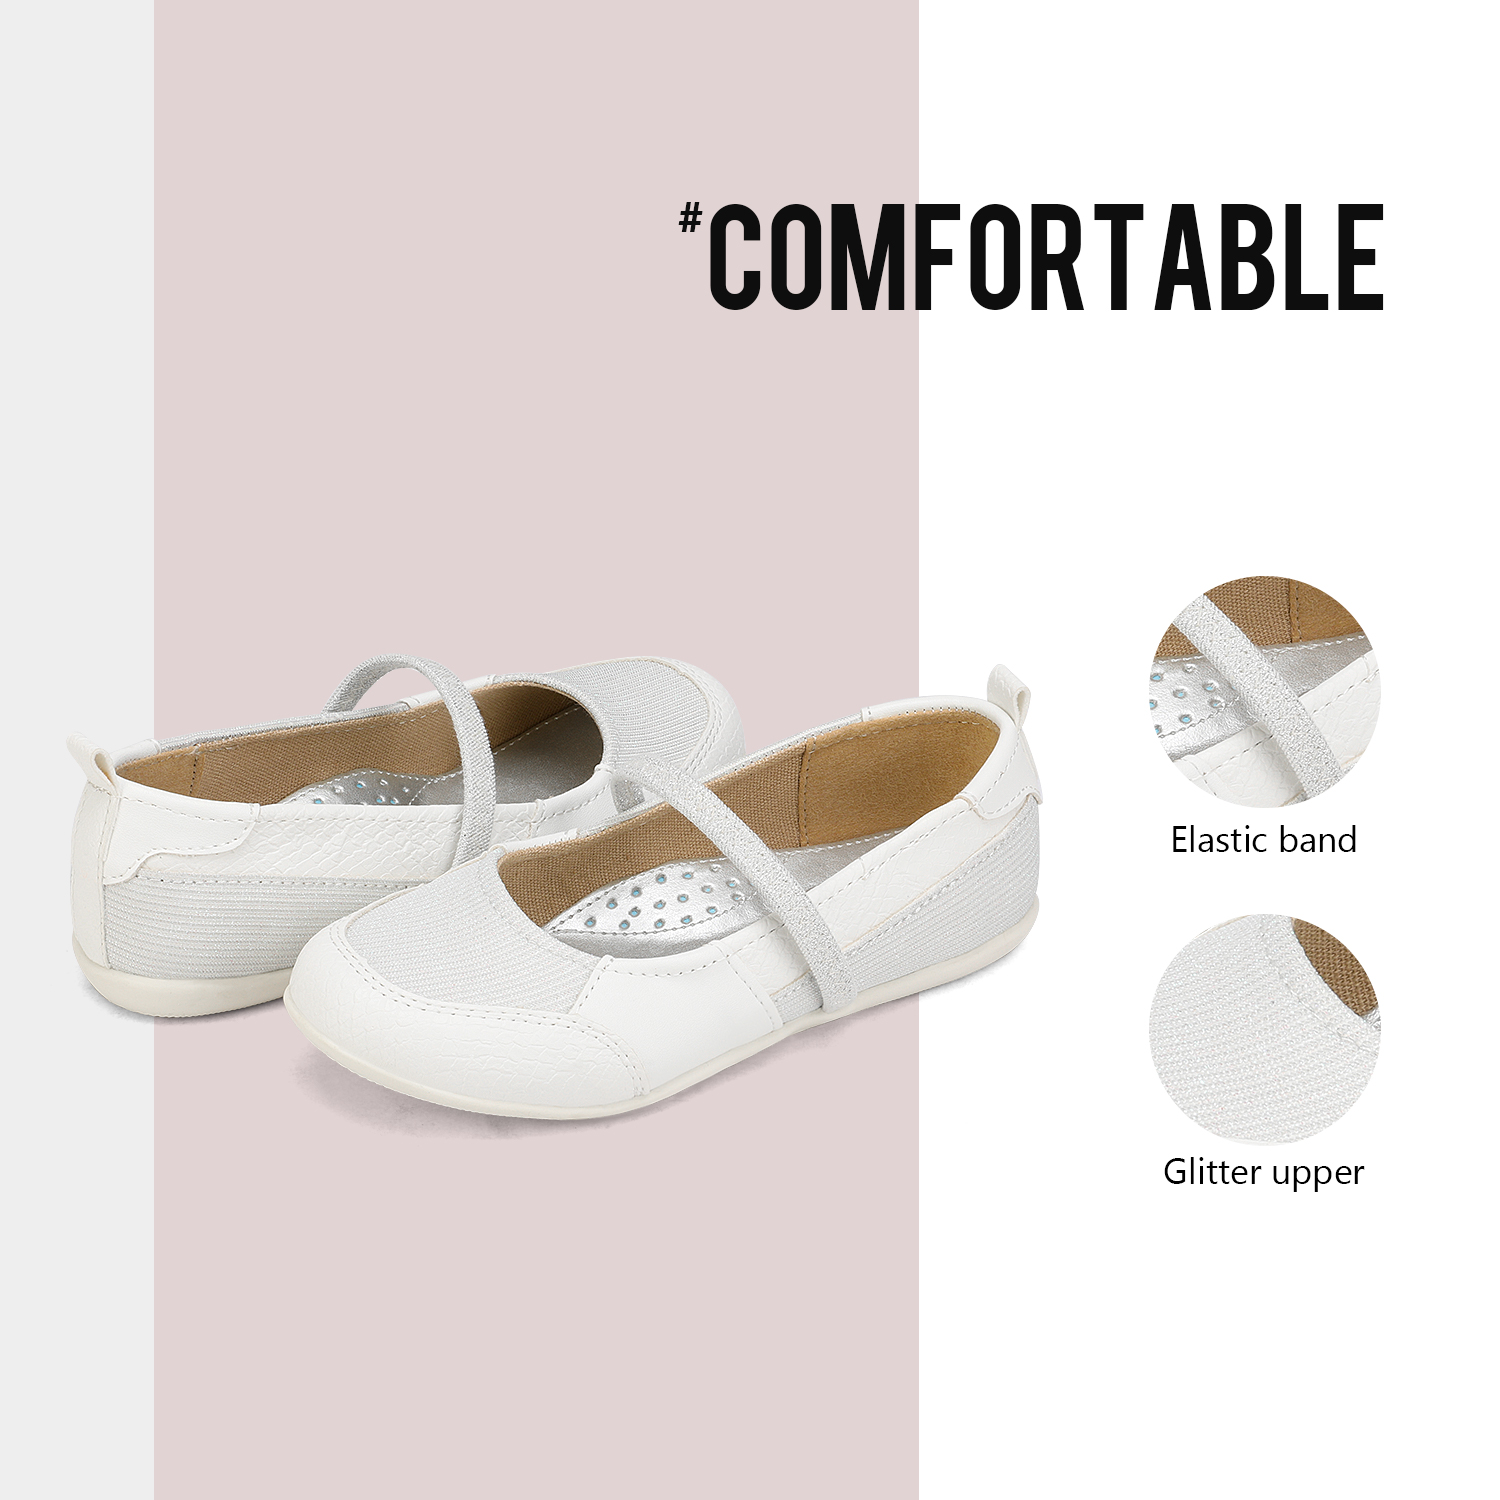 Dream Pairs Girls Mary Jane Flats Shoes Comfort School Casual Shoes Slip On Flat Shoes For Kids SASA-2 WHITE Size 8 - image 3 of 5